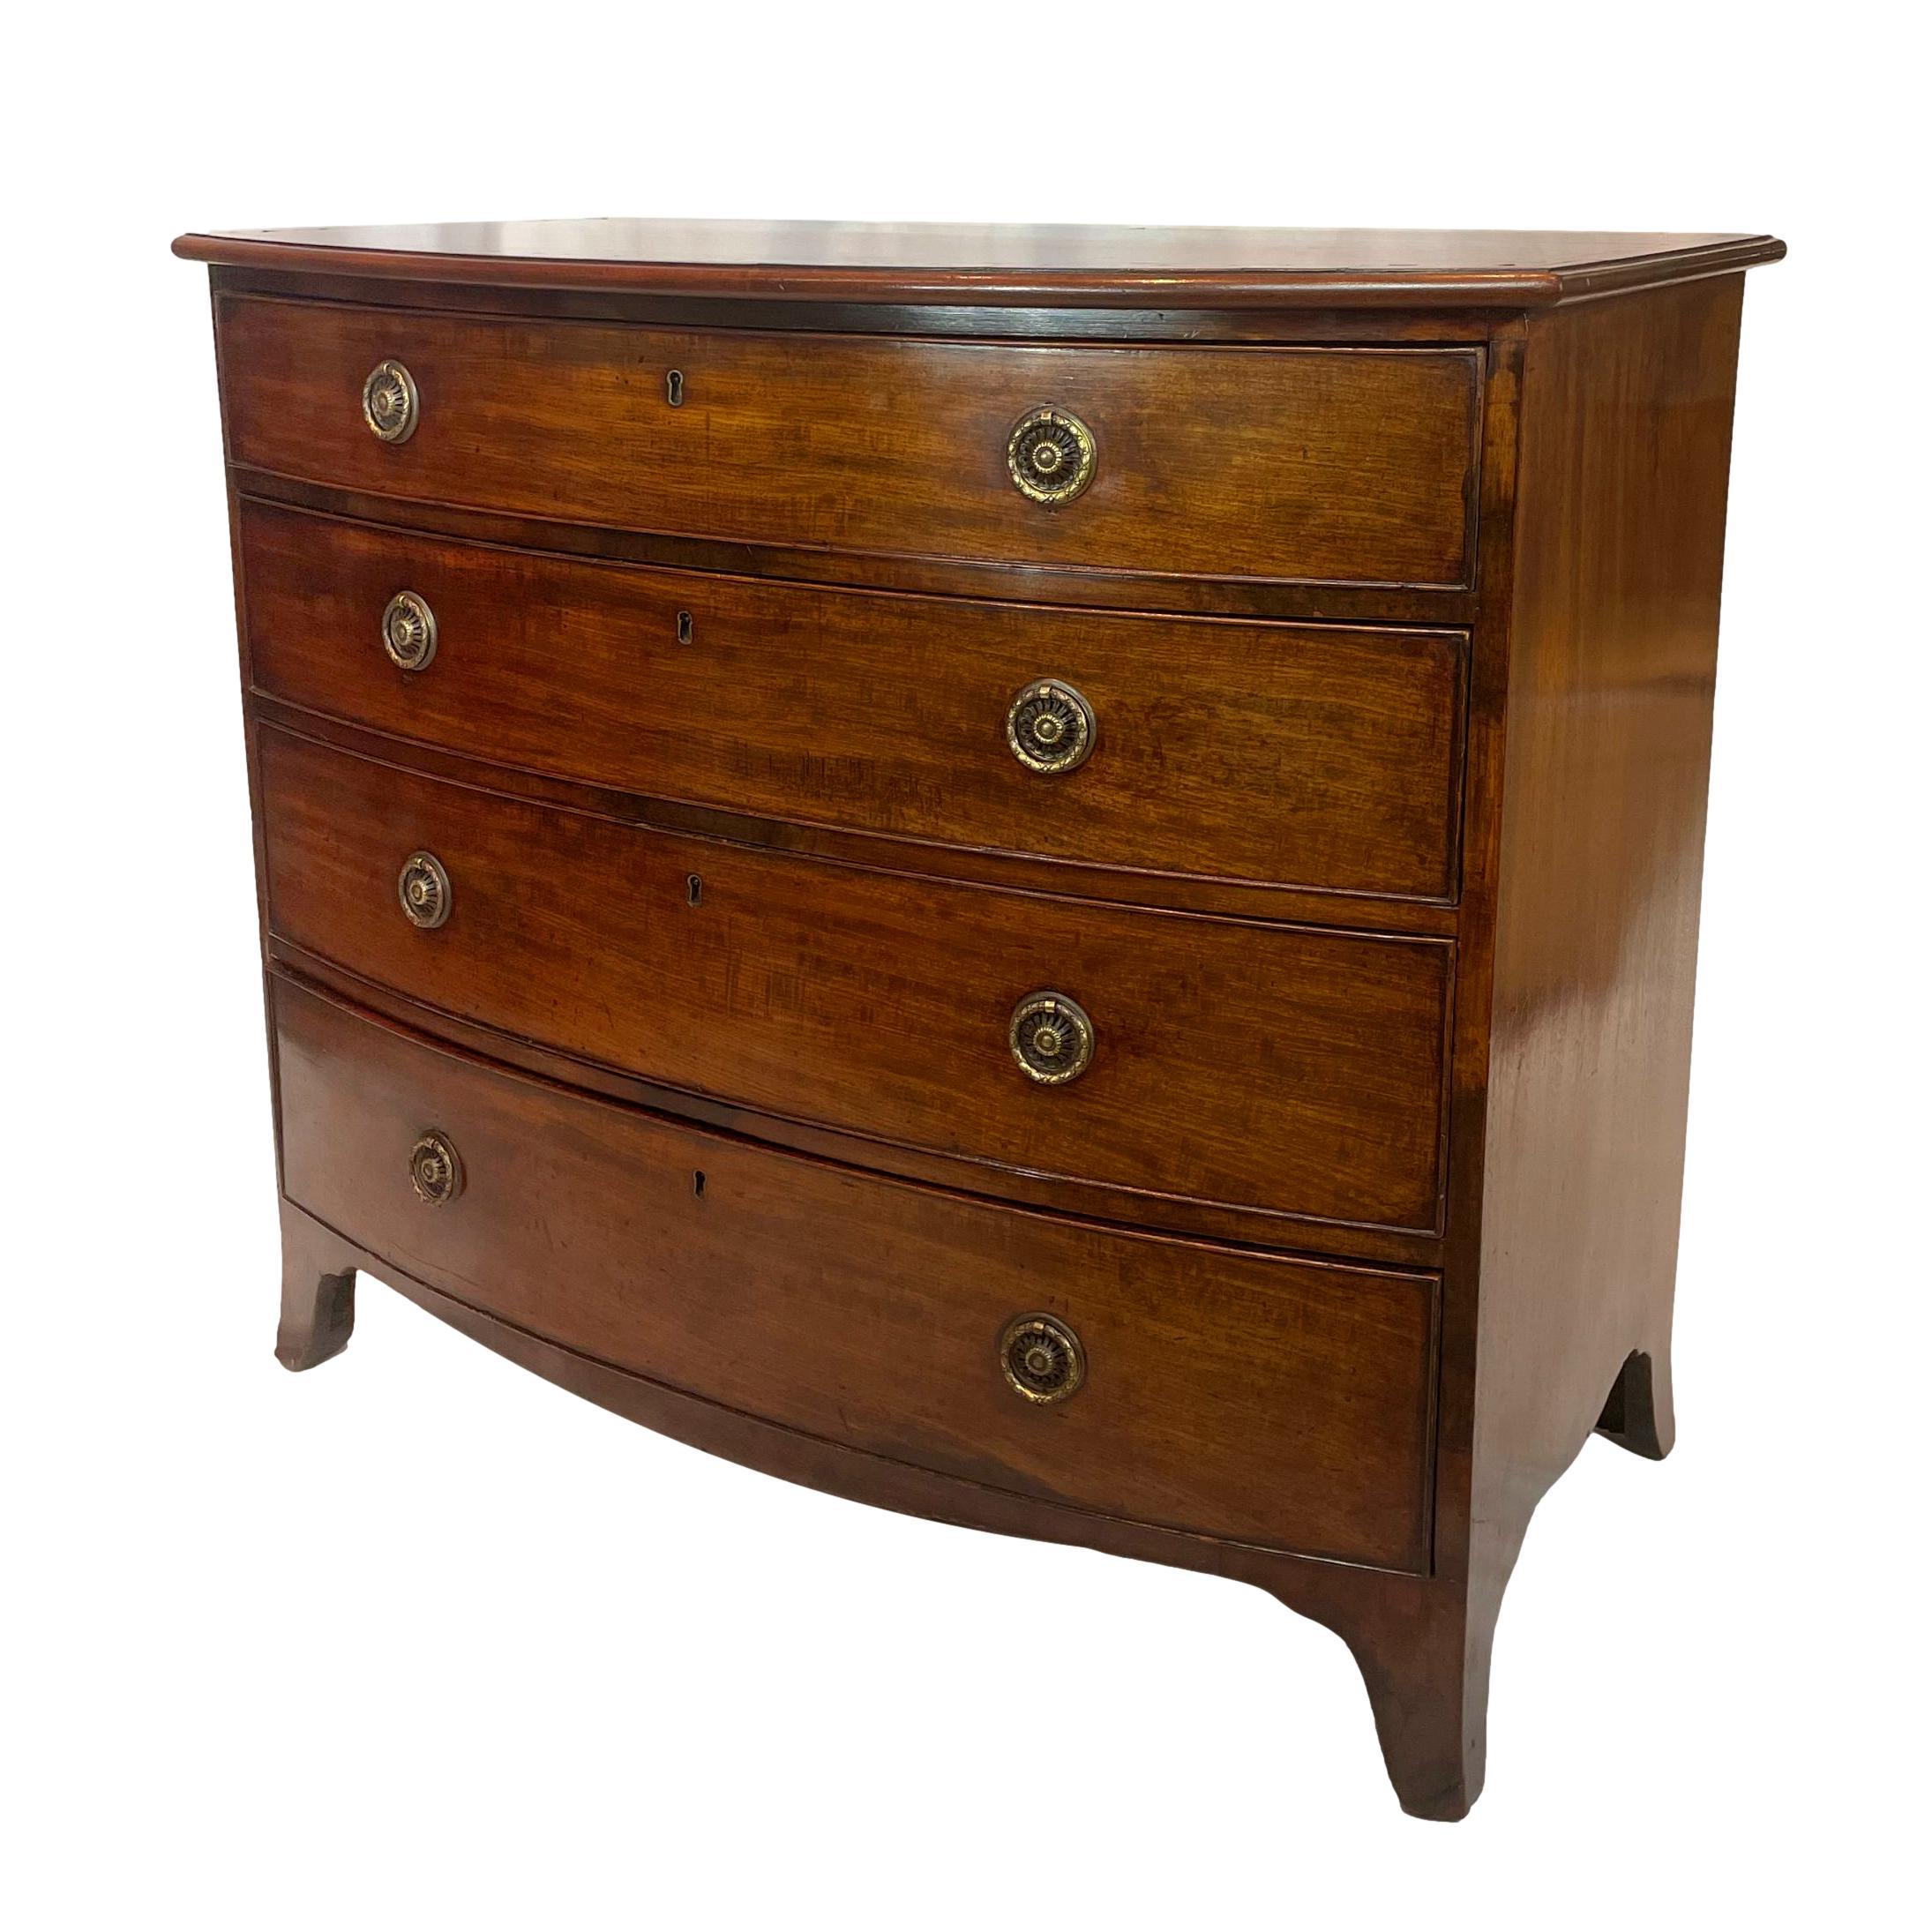 Georgian Mahogany Bowfront Chest-of-Drawers, with four long cock-beaded drawers above a shaped apron and splayed feet, the top with satinwood cross-banding and stringing, with highly detailed stamped and embossed brass rosette ring pulls, English,